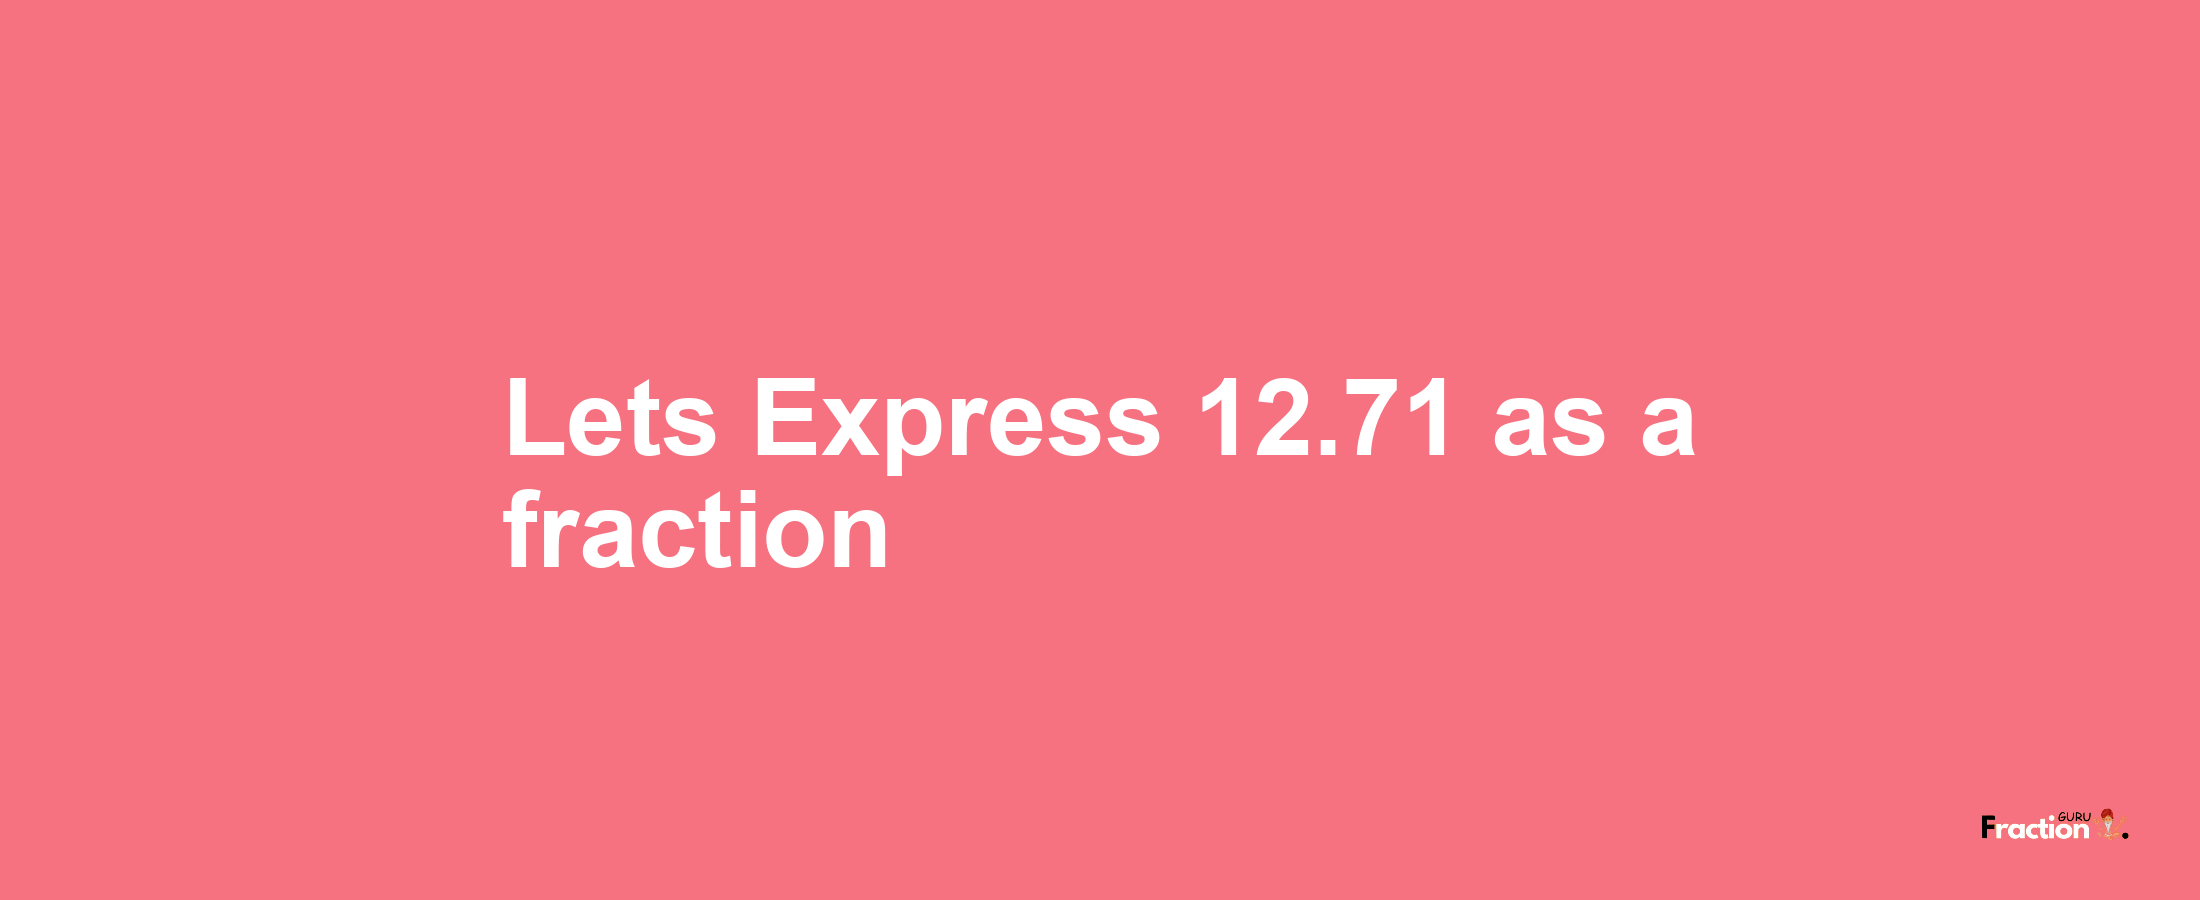 Lets Express 12.71 as afraction